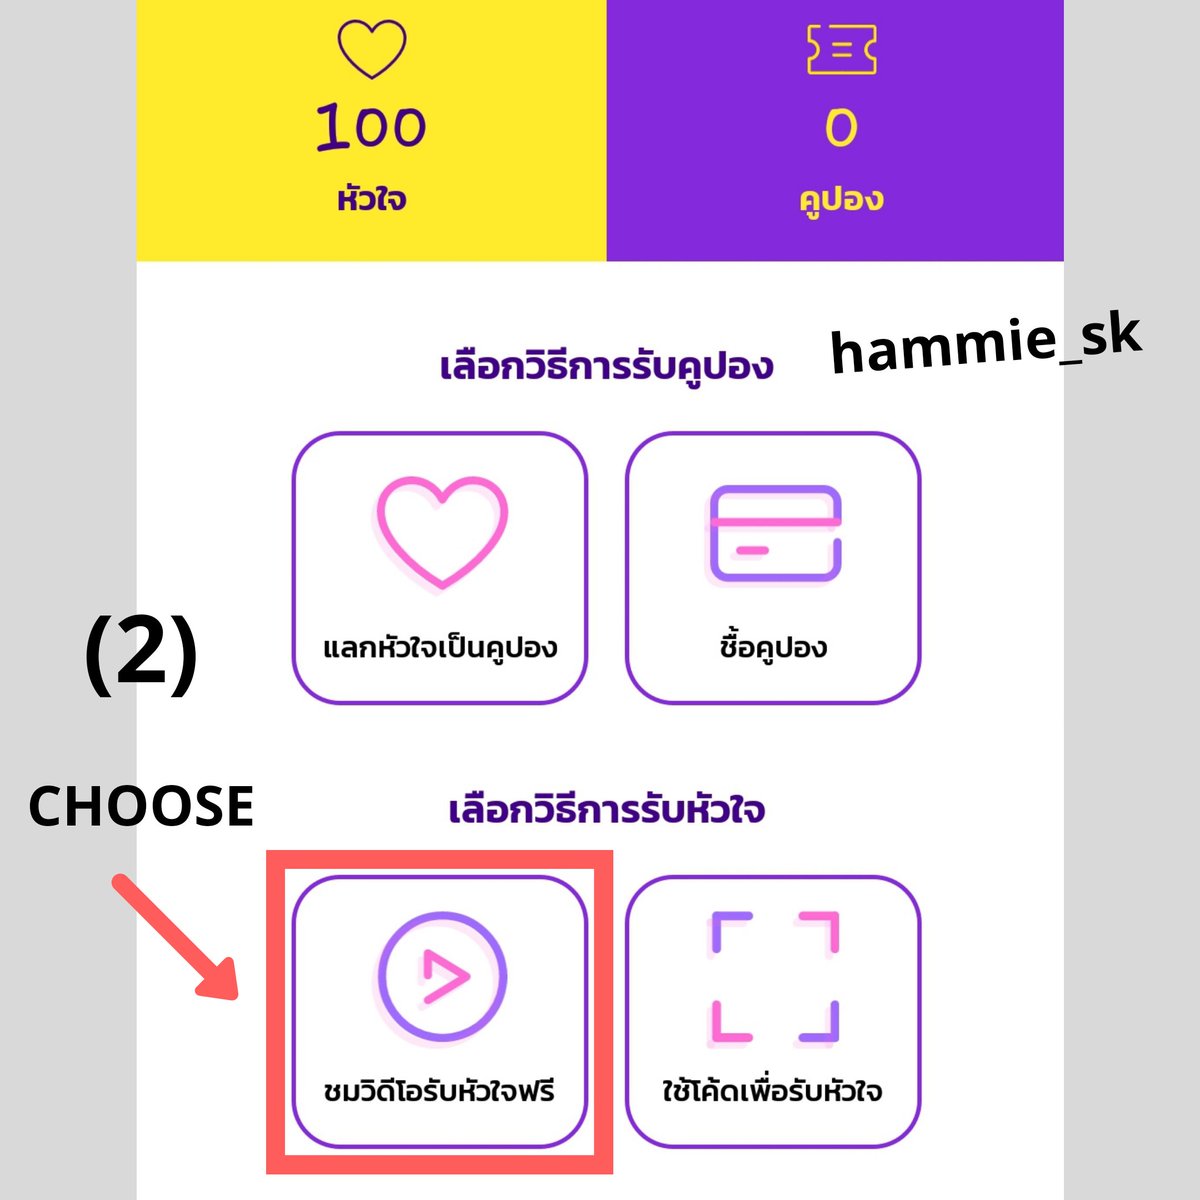 steps to collect hearts for free...featured ads are limited but you can watch free ads all day..the problem is i cant watch free ads since yesterday, lets wait  #คริสสิงโต  #ทีมพีรญา  #KristPerawat take out w full credit---if u have any question, comment in this thread